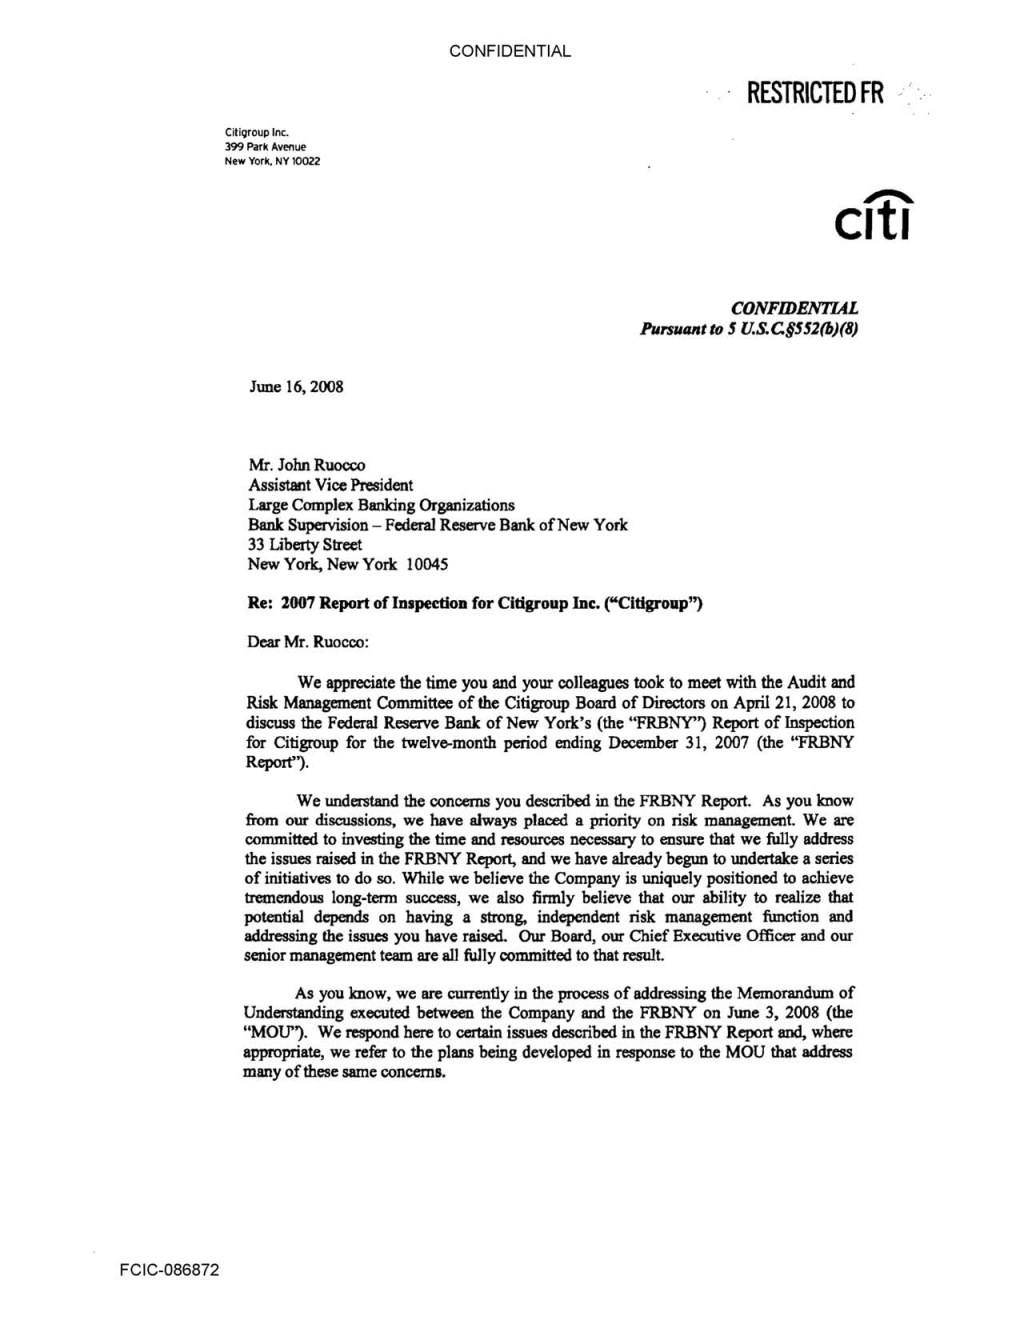 Citi Letter from Brian R Leach and Michael S Helfer to John Ruocco at FRBNY